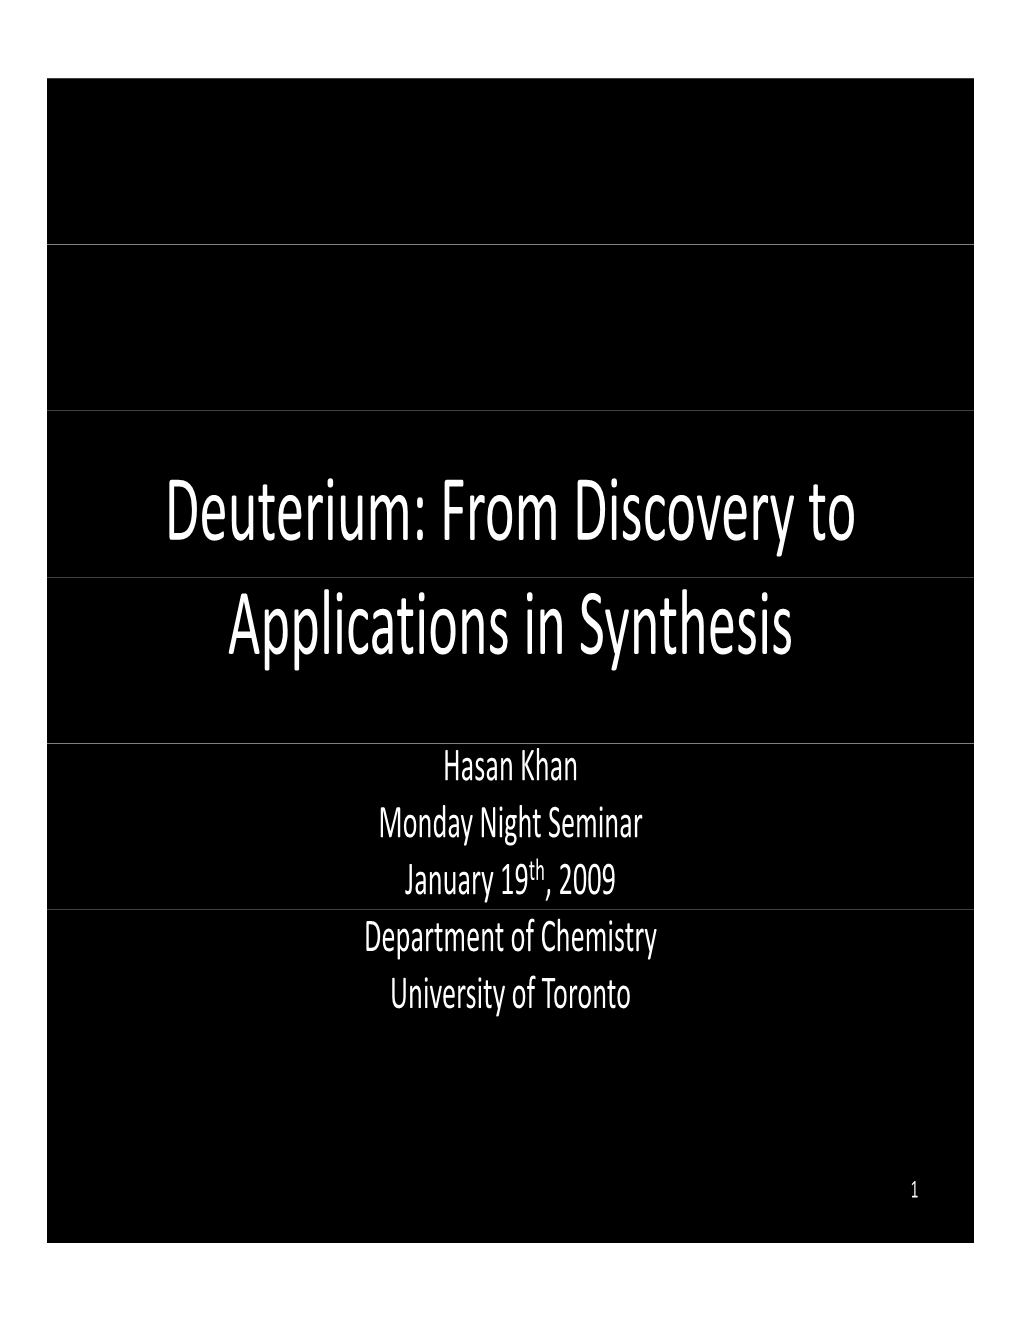 Deuterium: from Discovery to Applications in Synthesis